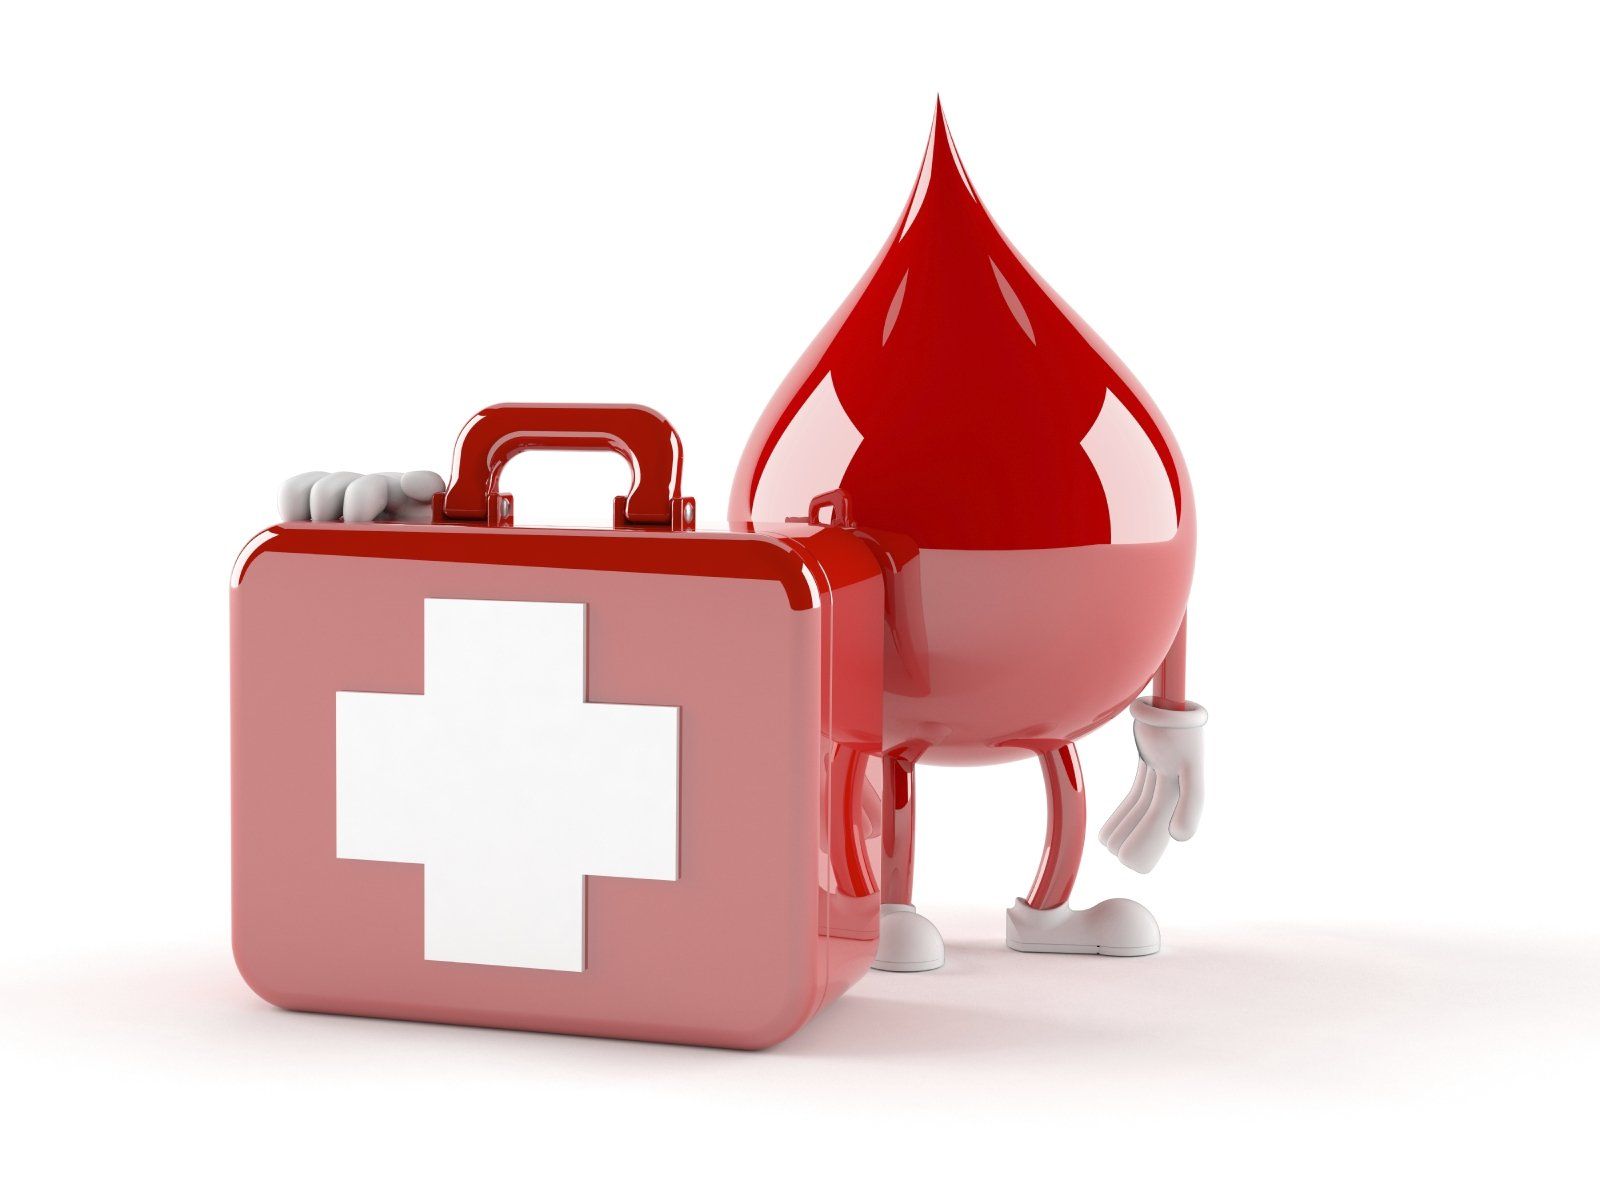 A 3D illustration of a red blood drop figure with a first aid kit after a 